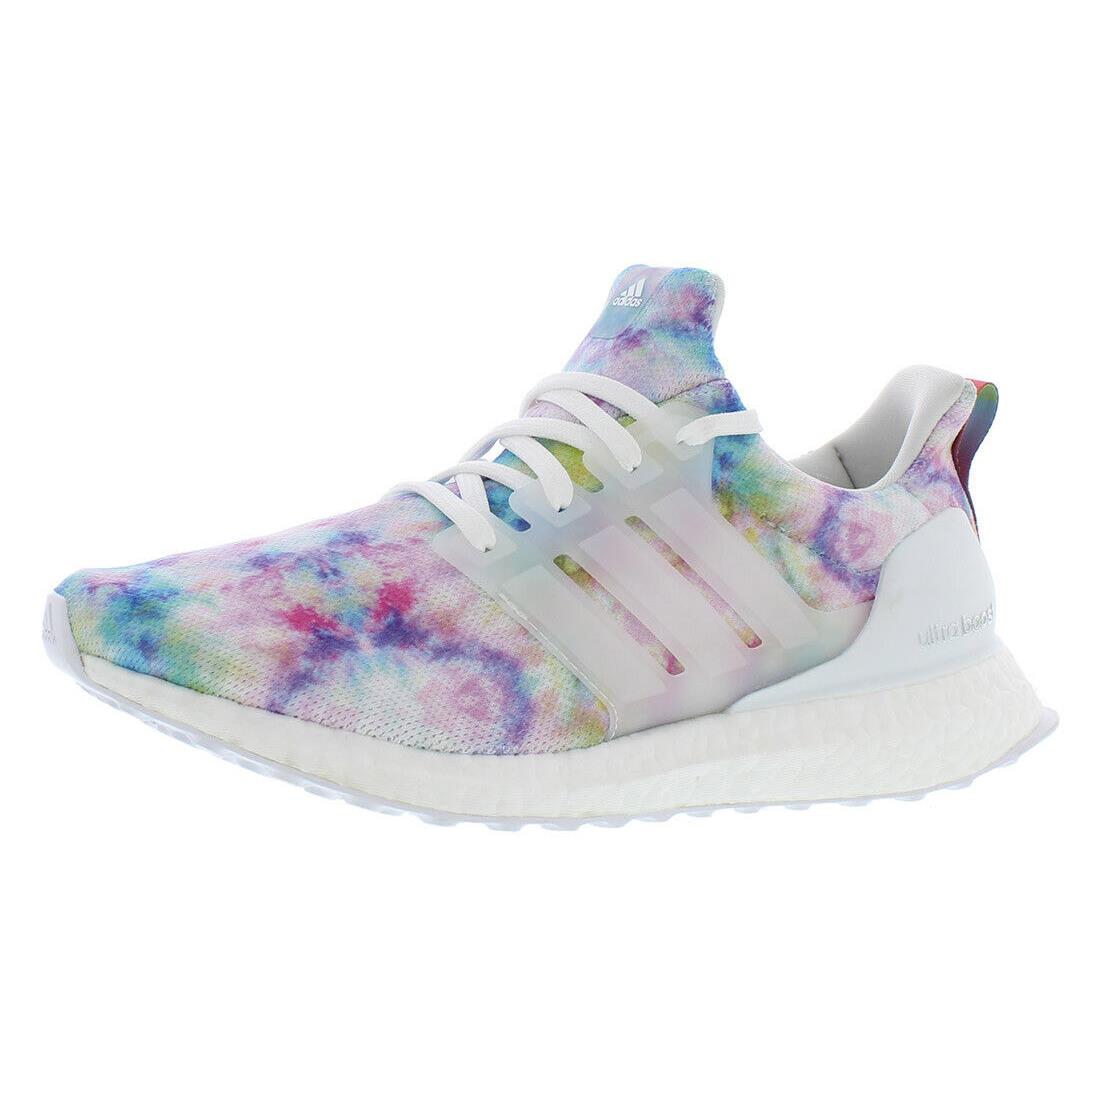 Adidas Ultraboost 4.0 Dna Womens Shoes - Main: Multi-Colored